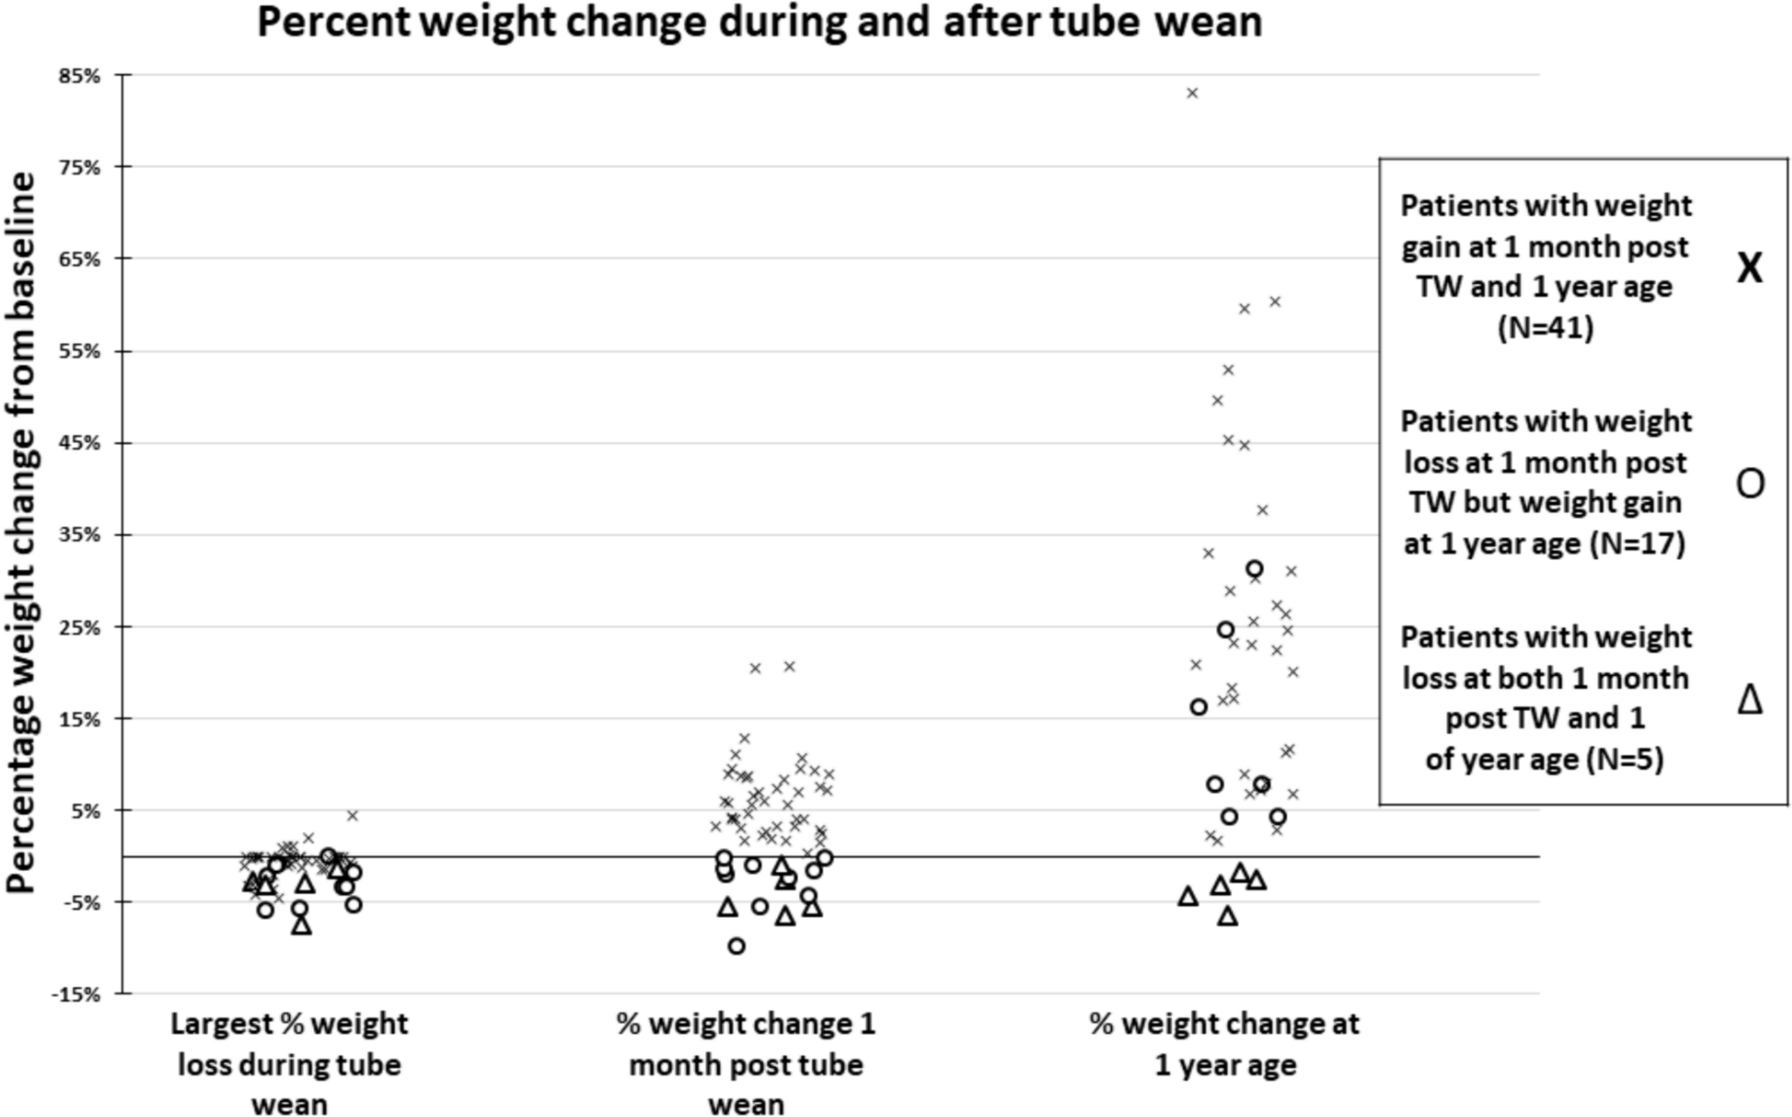 Structured Tube Weaning Using the Hunger Provocation Method in Infants with Single Ventricle Heart Defects: A Multicenter Study